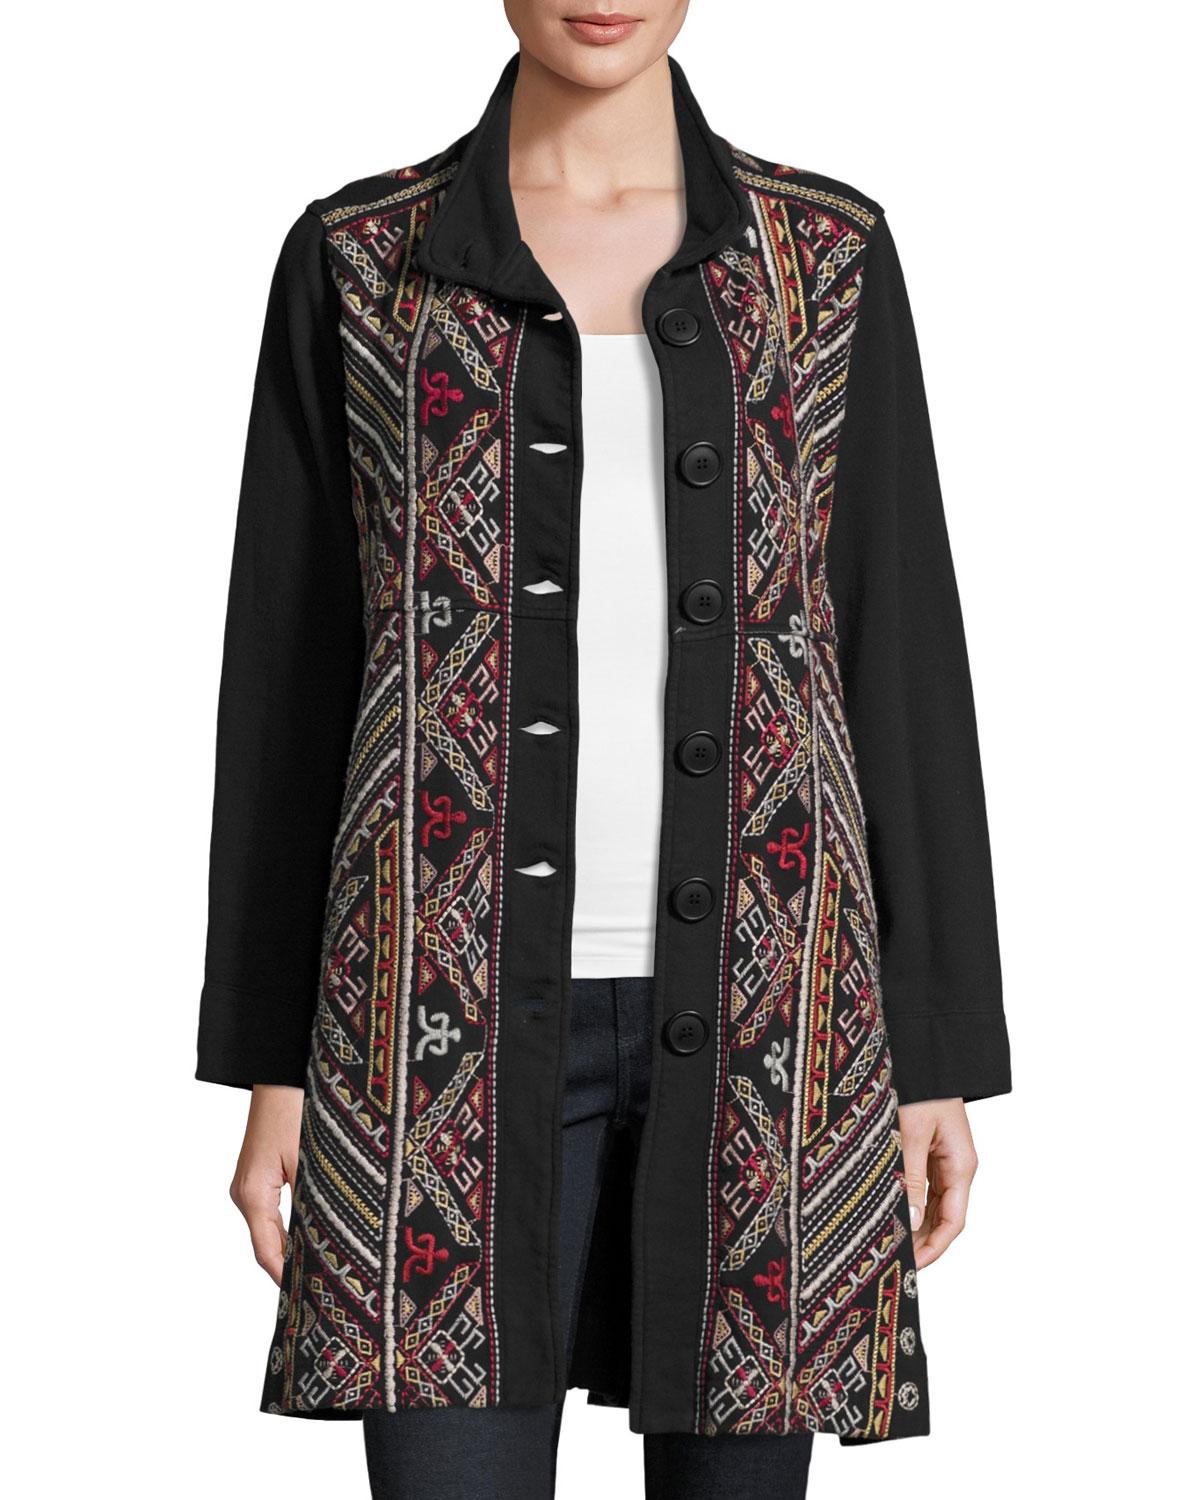 Lyst - Johnny Was Landon Embroidered Military Jacket in Black